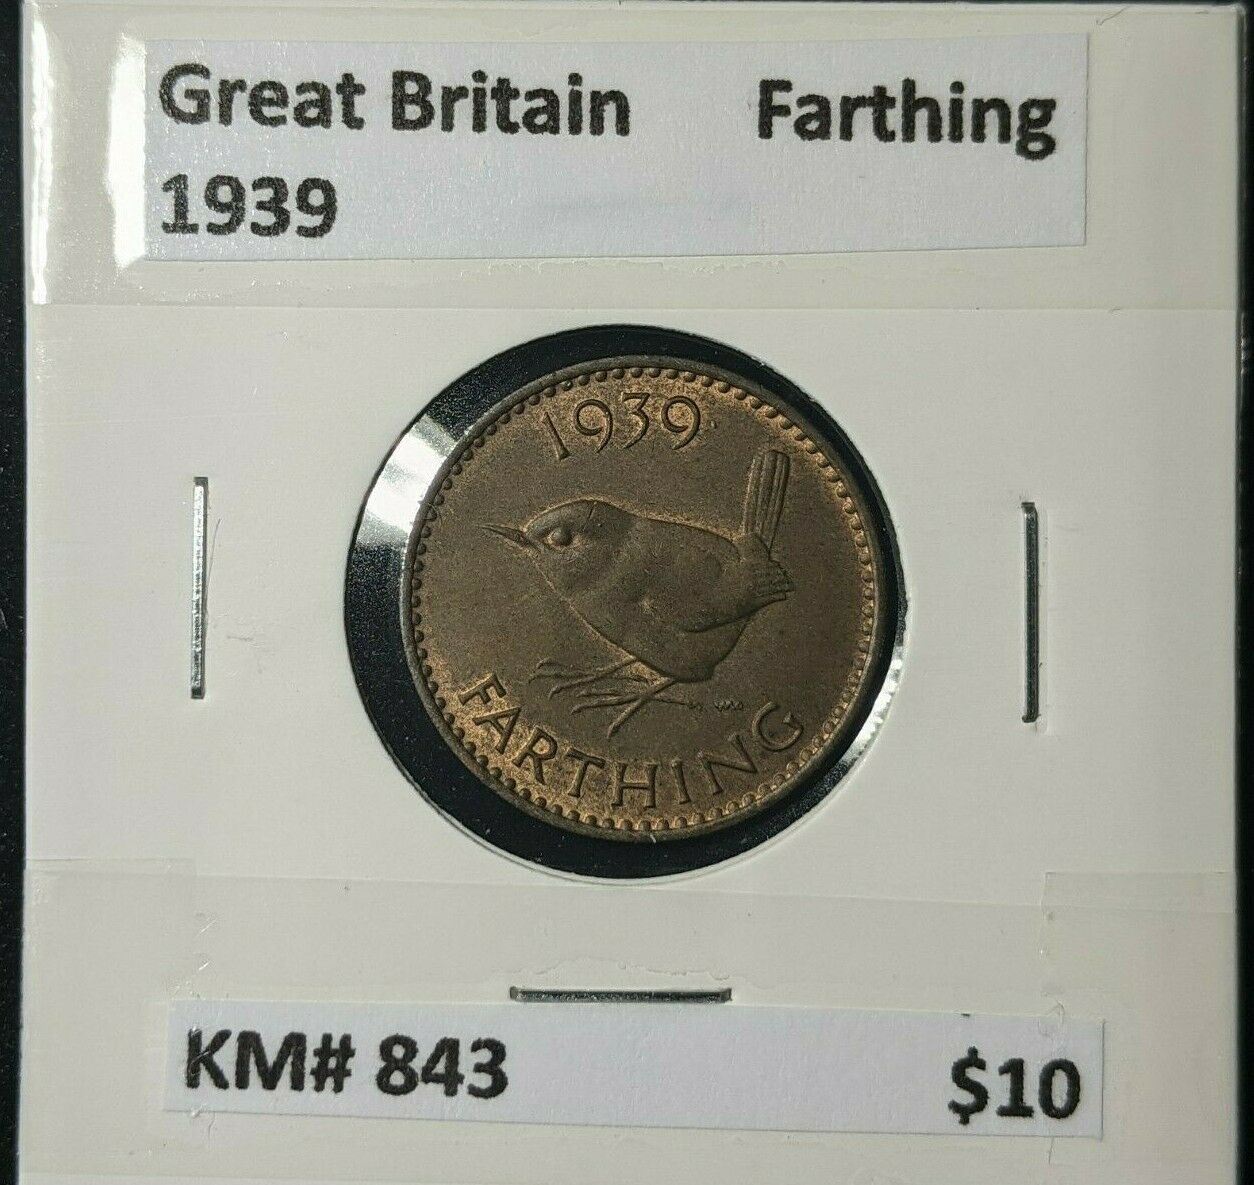 Great Britain 1939 1/4d Farthing KM# 843 #215